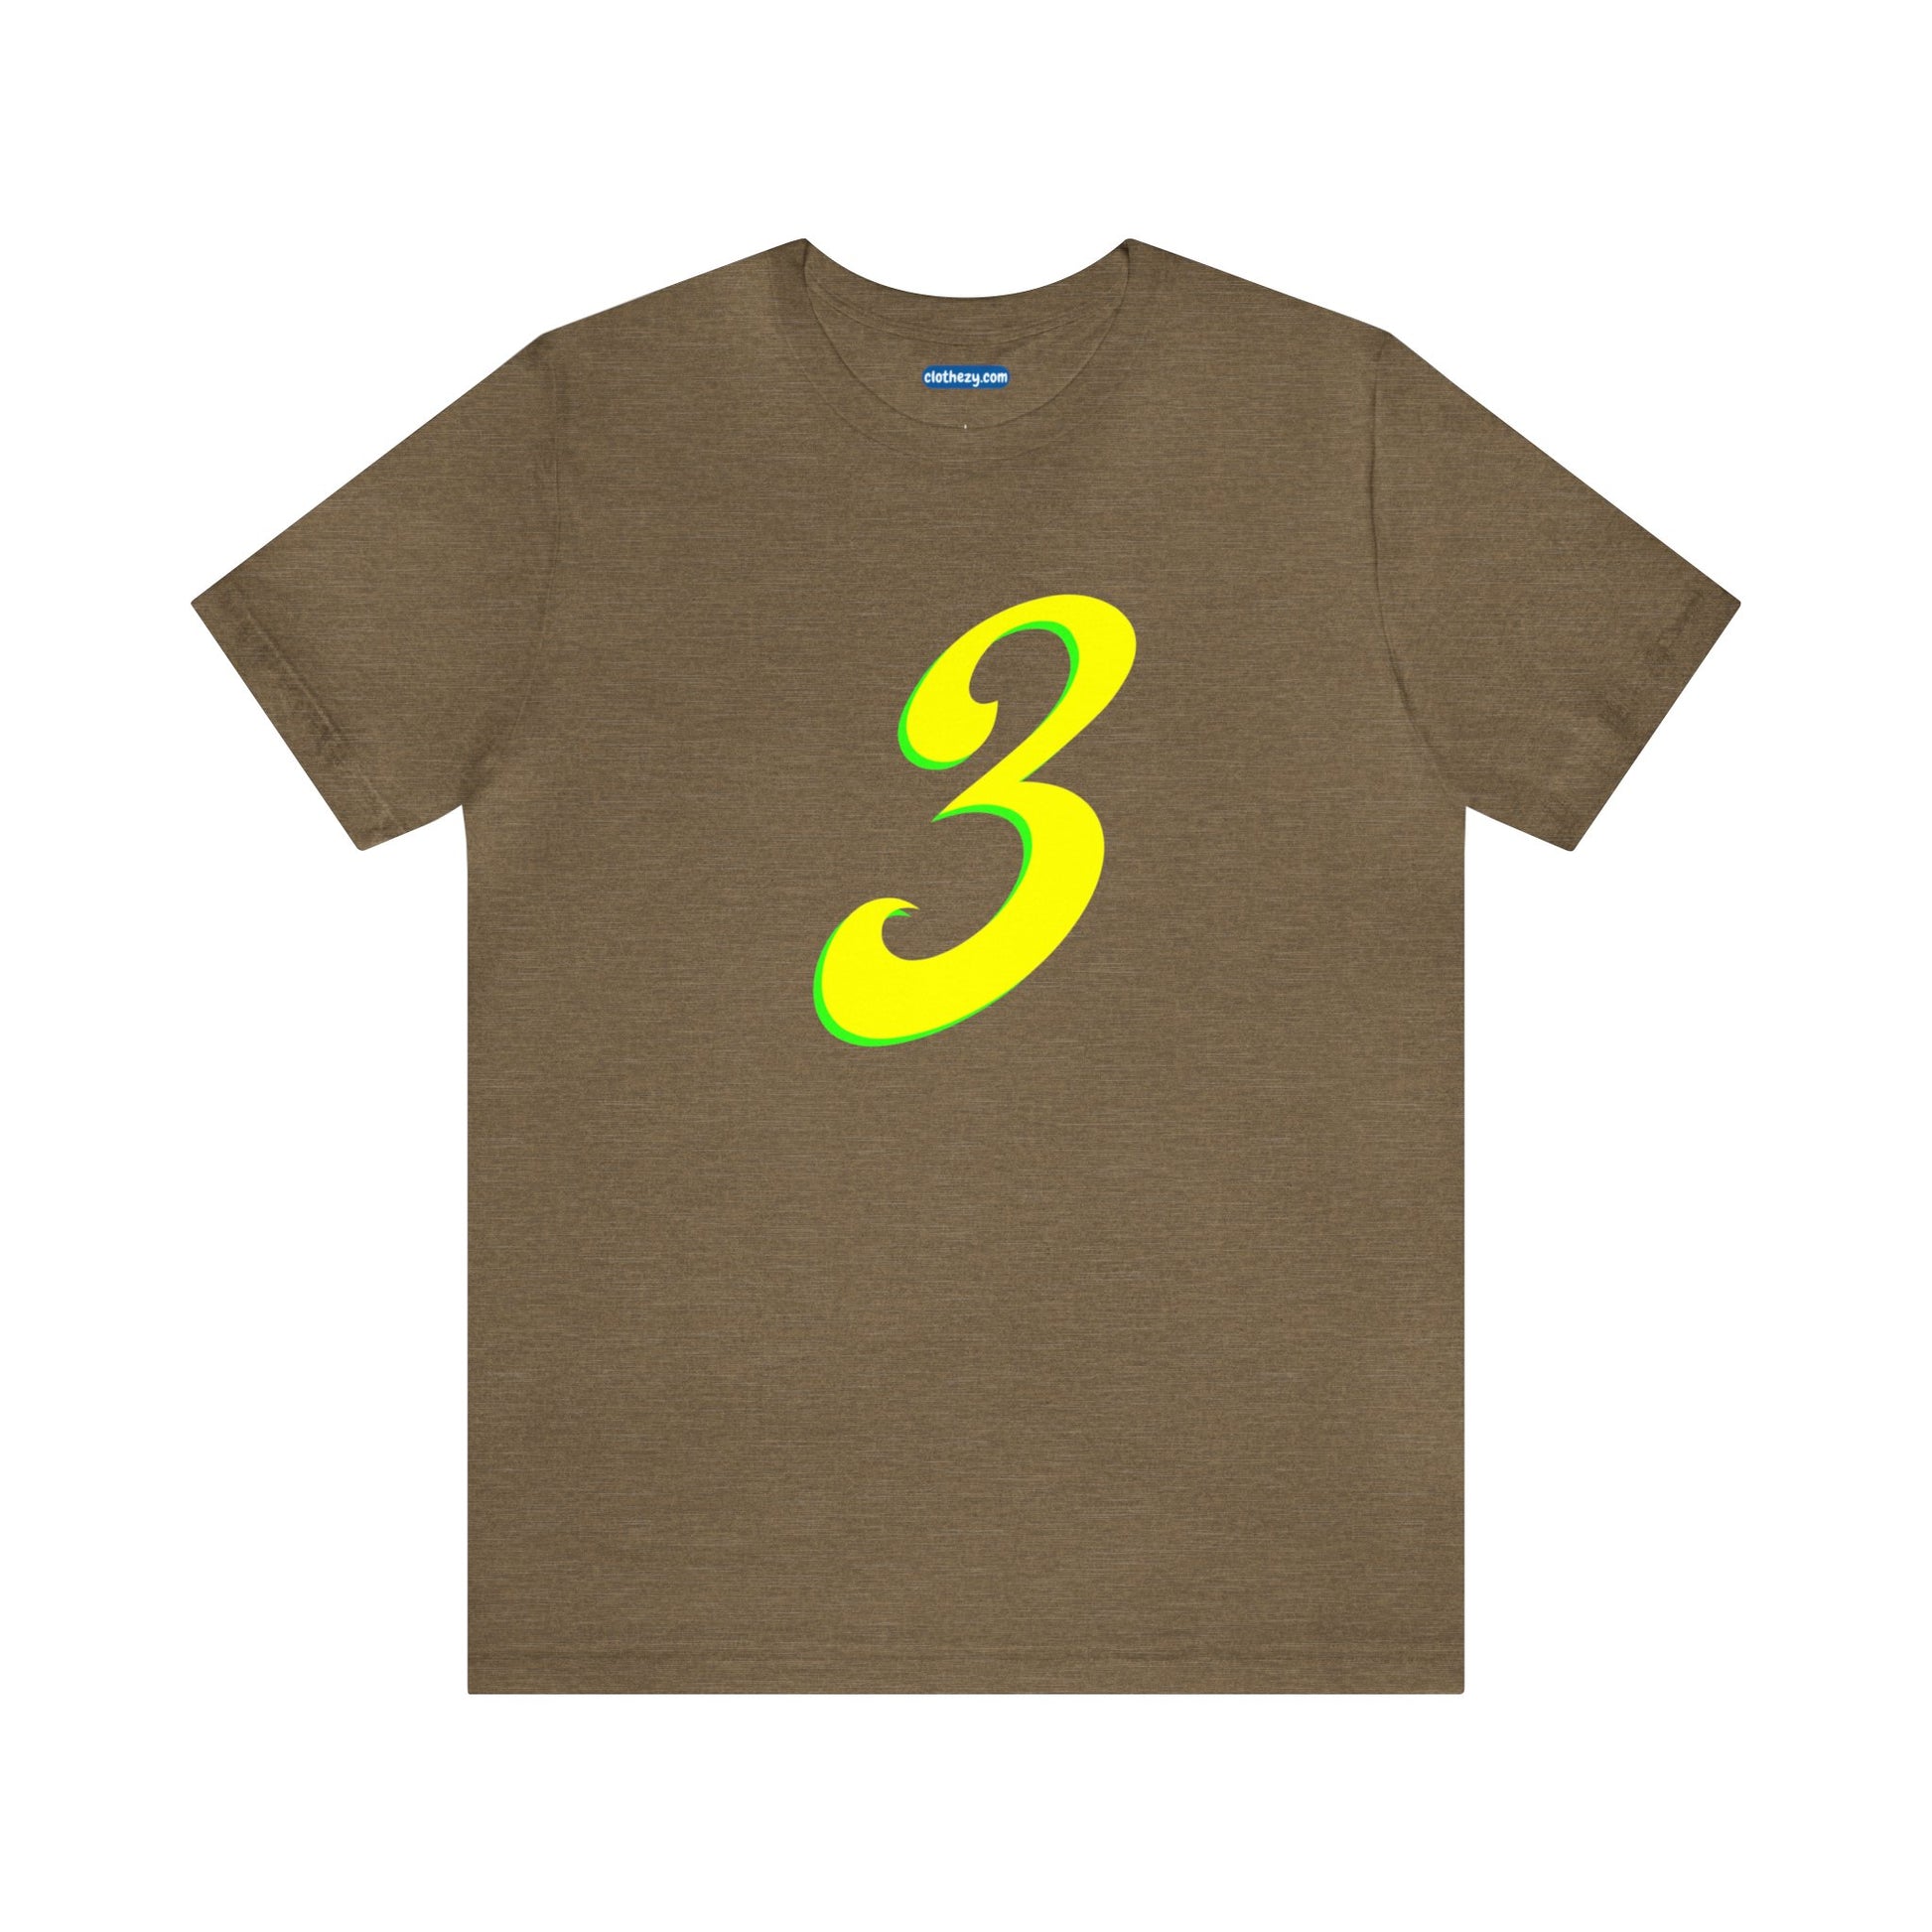 Number 3 Design - Soft Cotton Tee for birthdays and celebrations, Gift for friends and family, Multiple Options by clothezy.com in Olive Heather Size Small - Buy Now